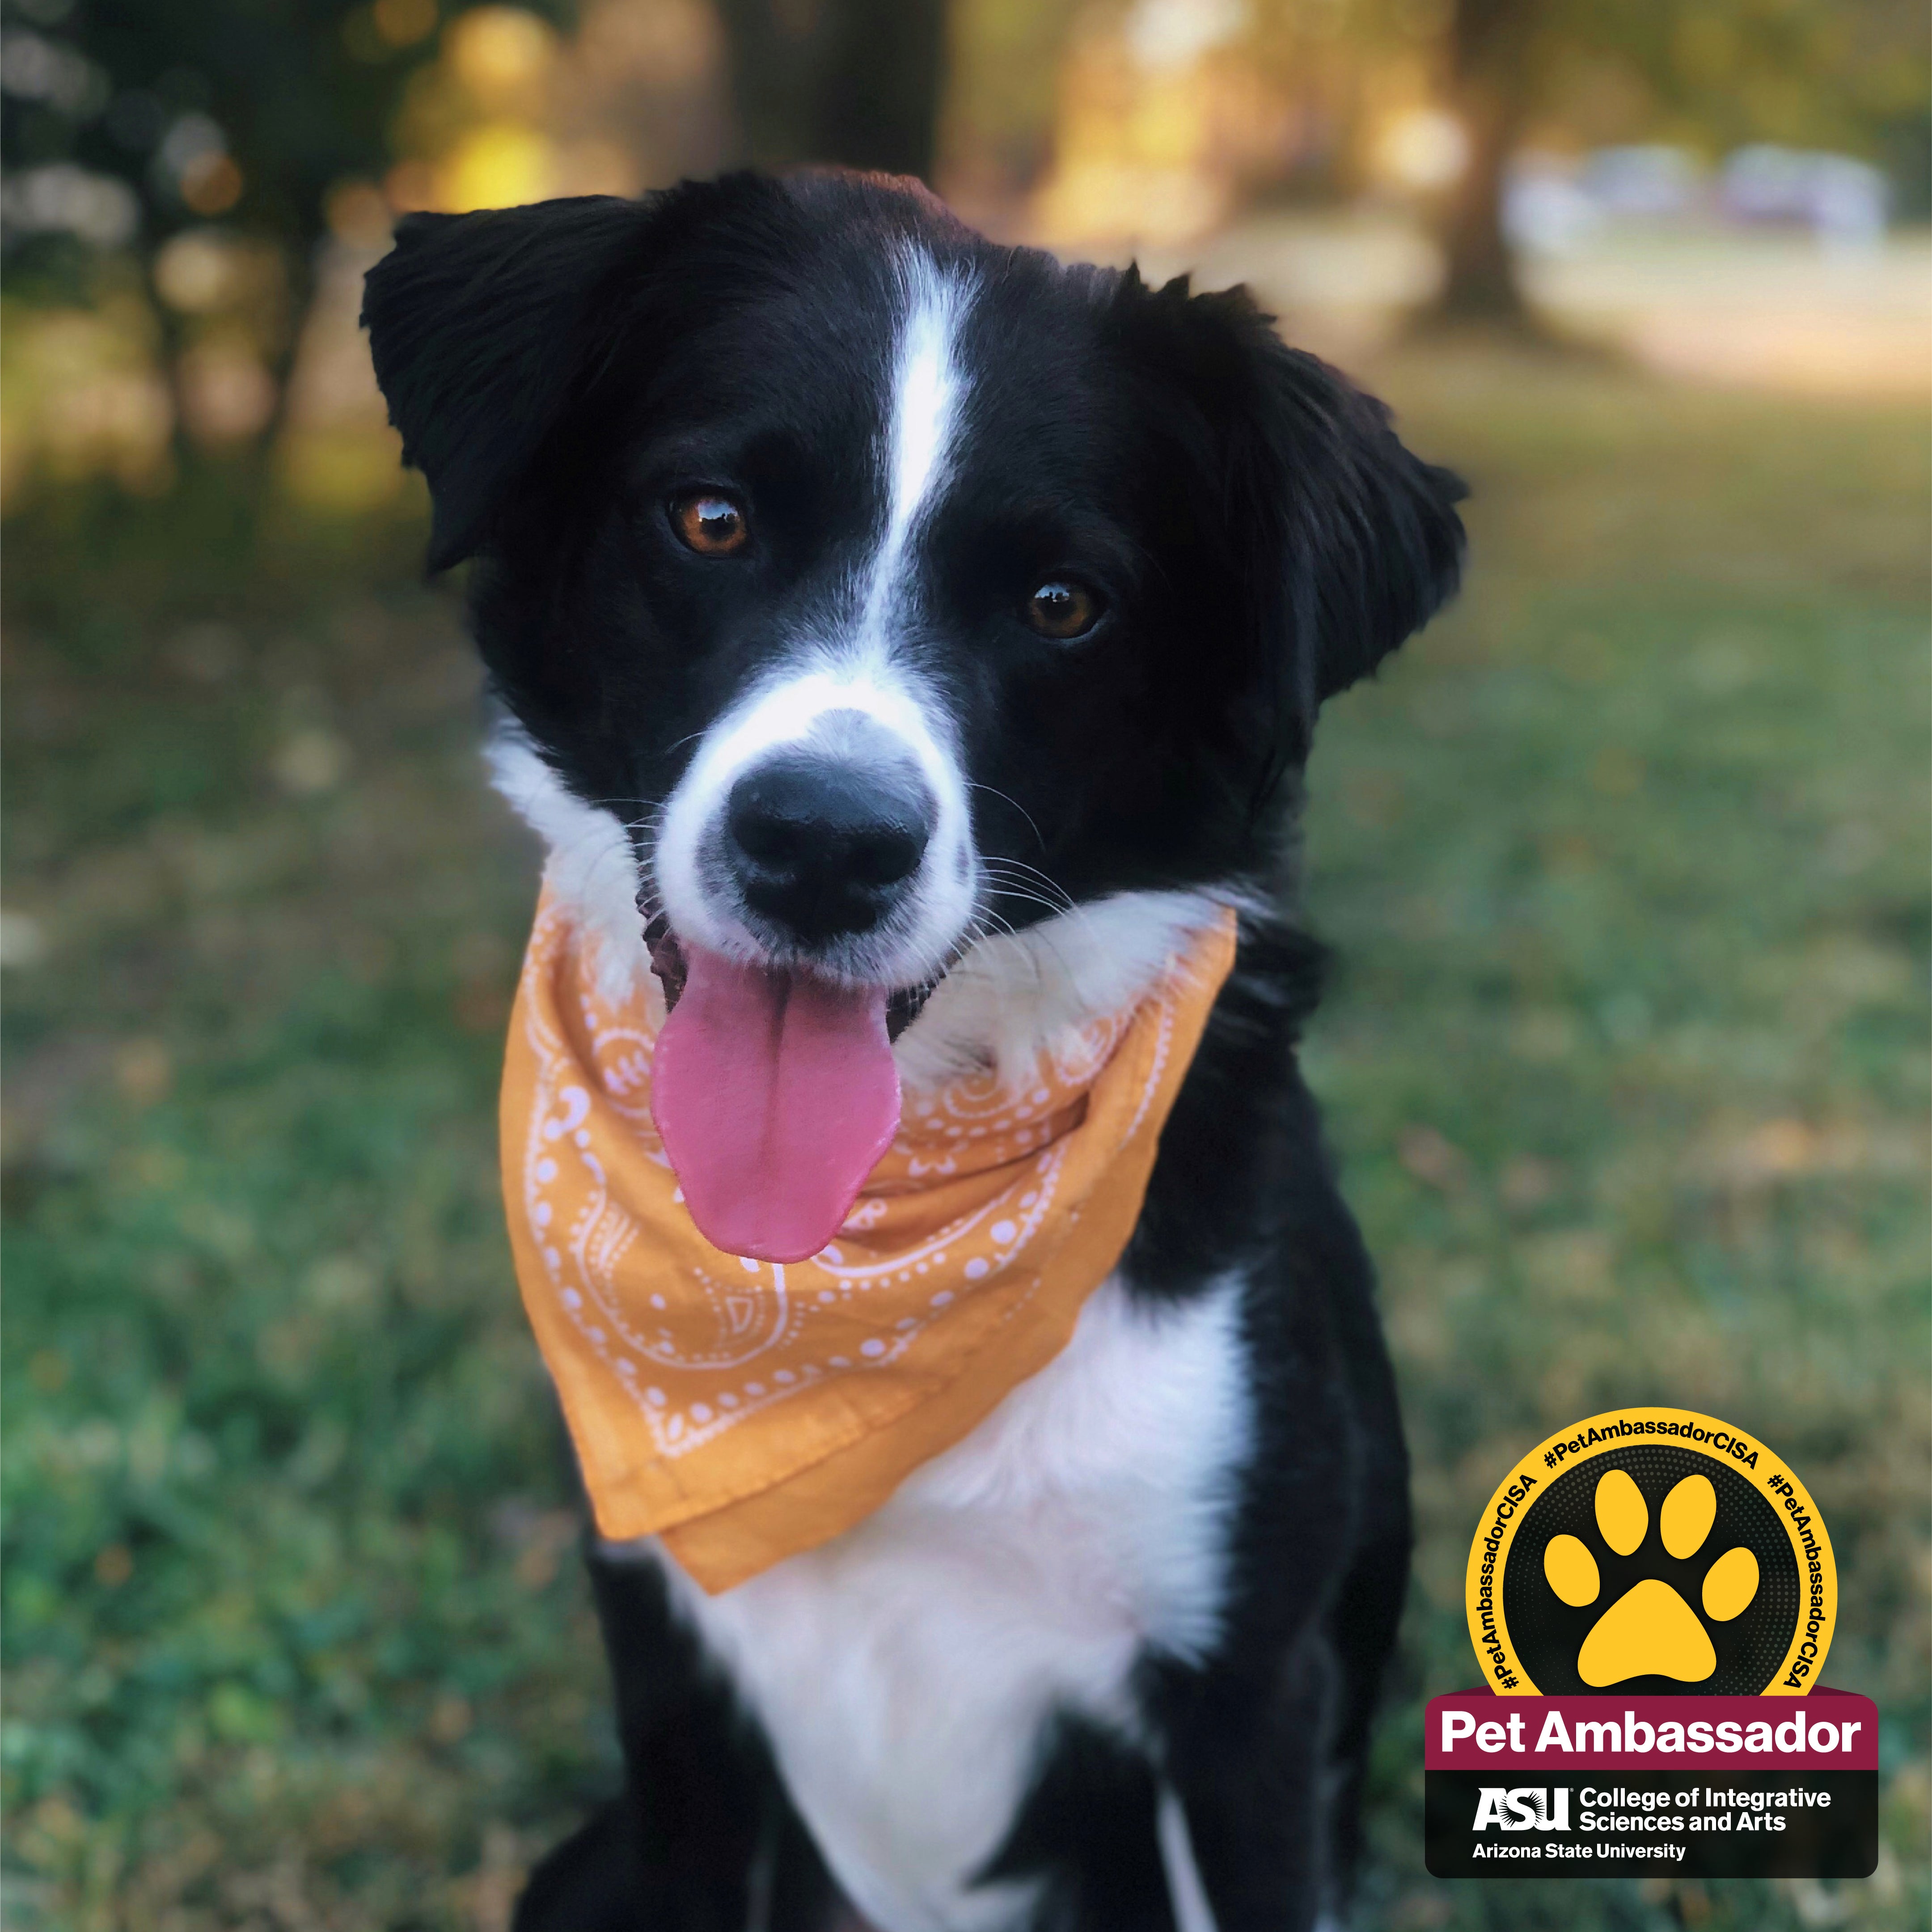 Happy Border Collie Mix, Summer is sitting on the grass with her tongue hanging out. Her expressive brown eyes are looking right into the camera. She is mostly black with white markings down the middle of her face and on her chest. She is wearing an orange bandana.